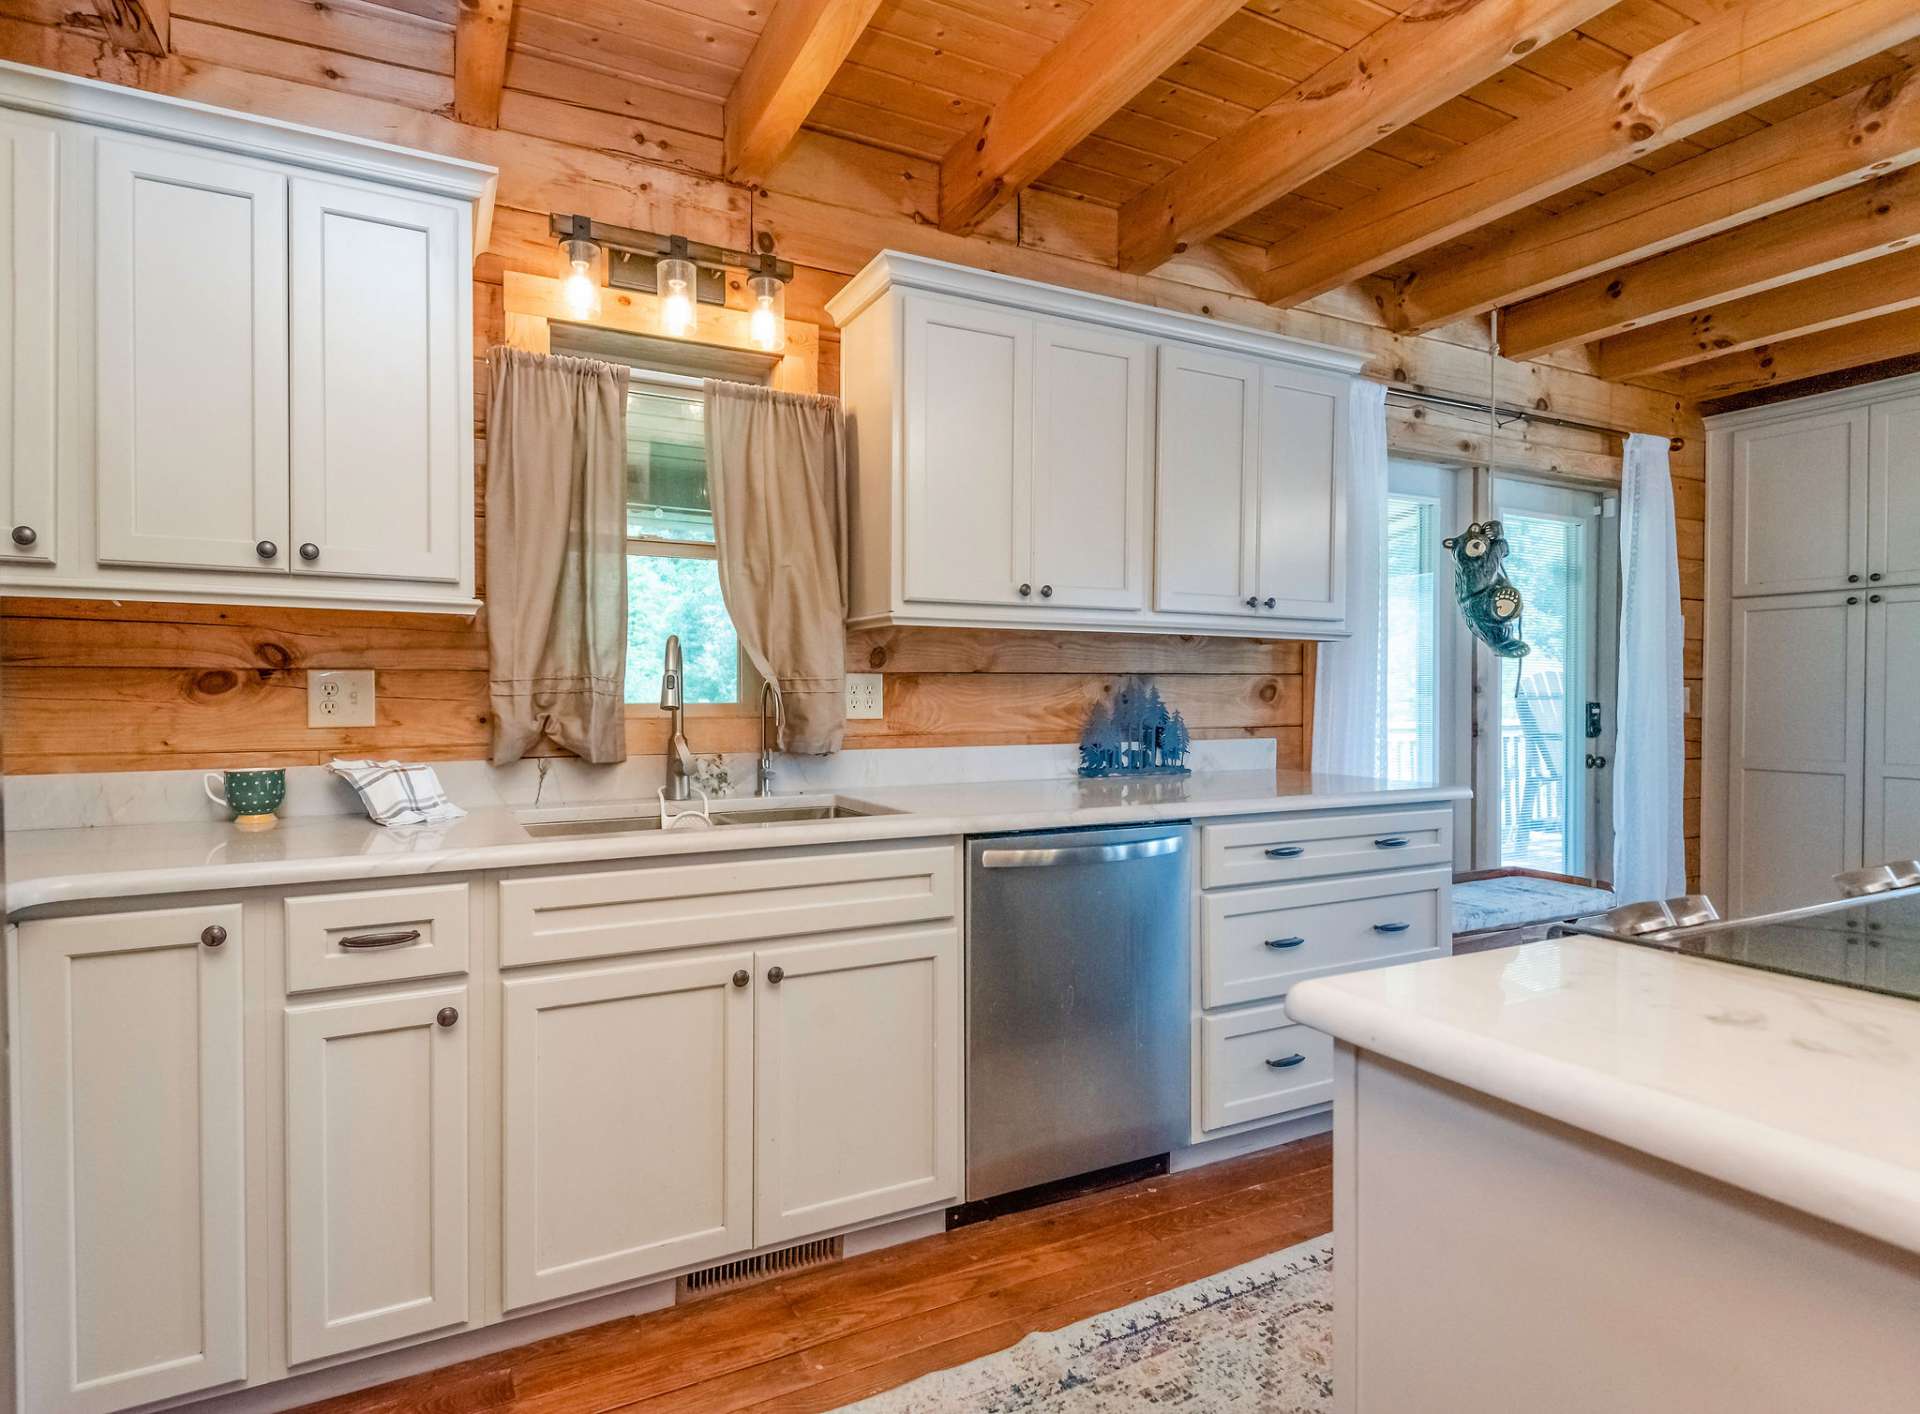 The white cabinets and accents mellow out the warmness of the pine interior in this lovely home.